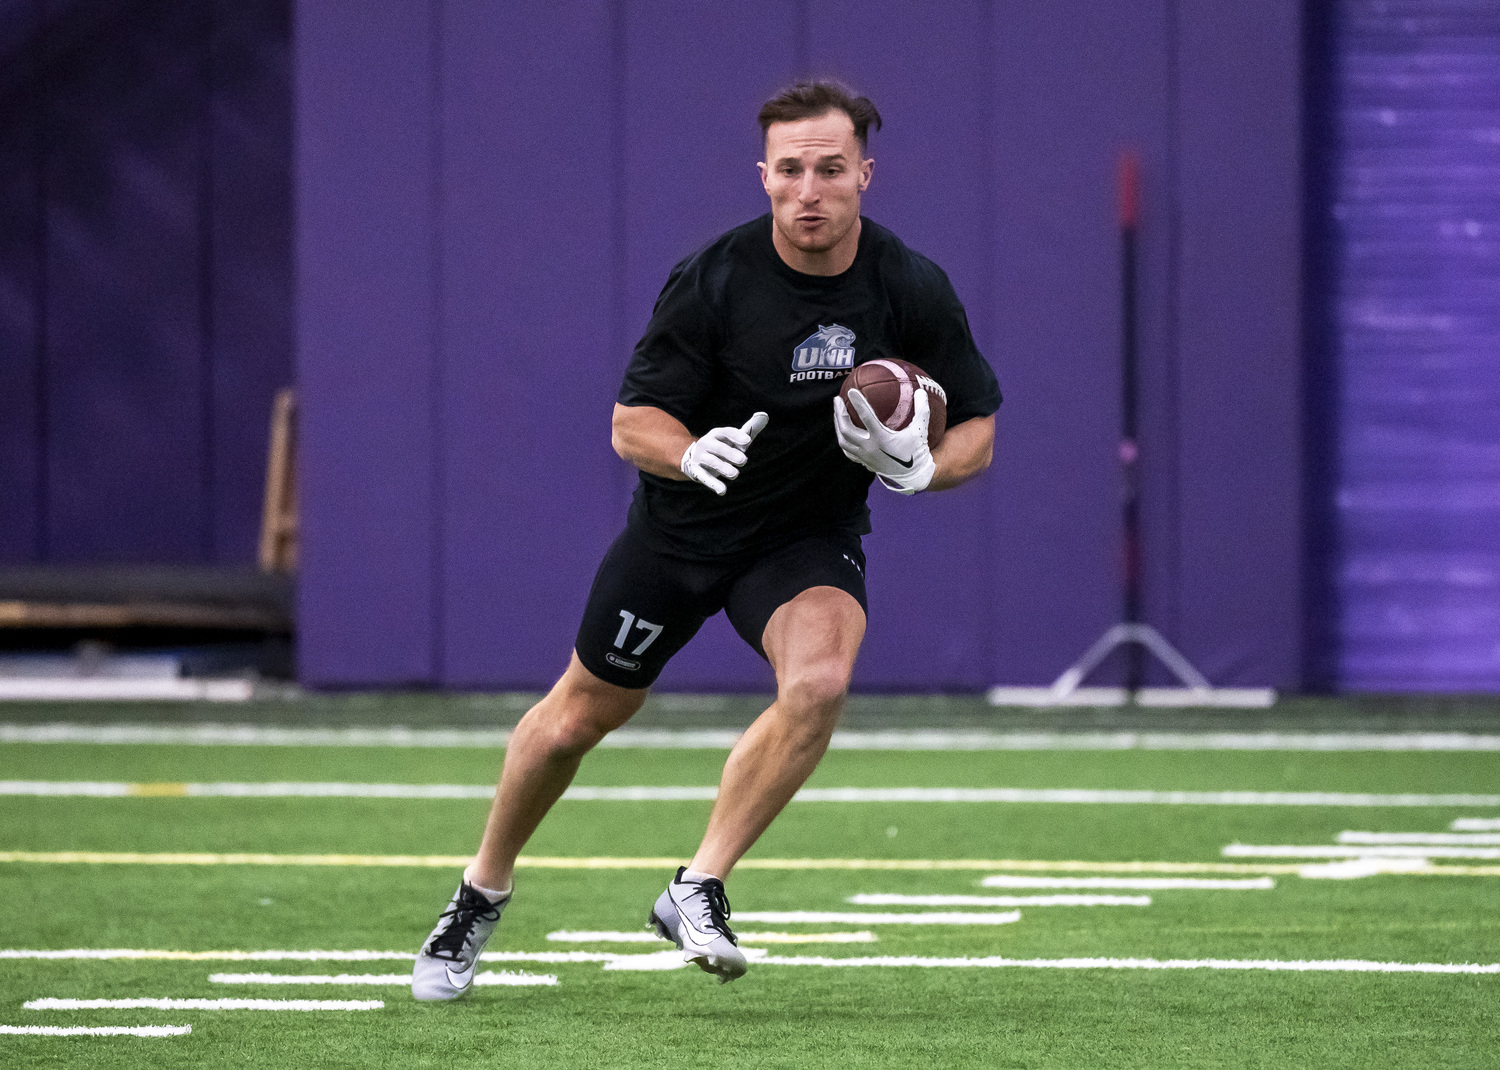 Dylan Laube on his NFL Pro Day at the College of the Holy Cross.